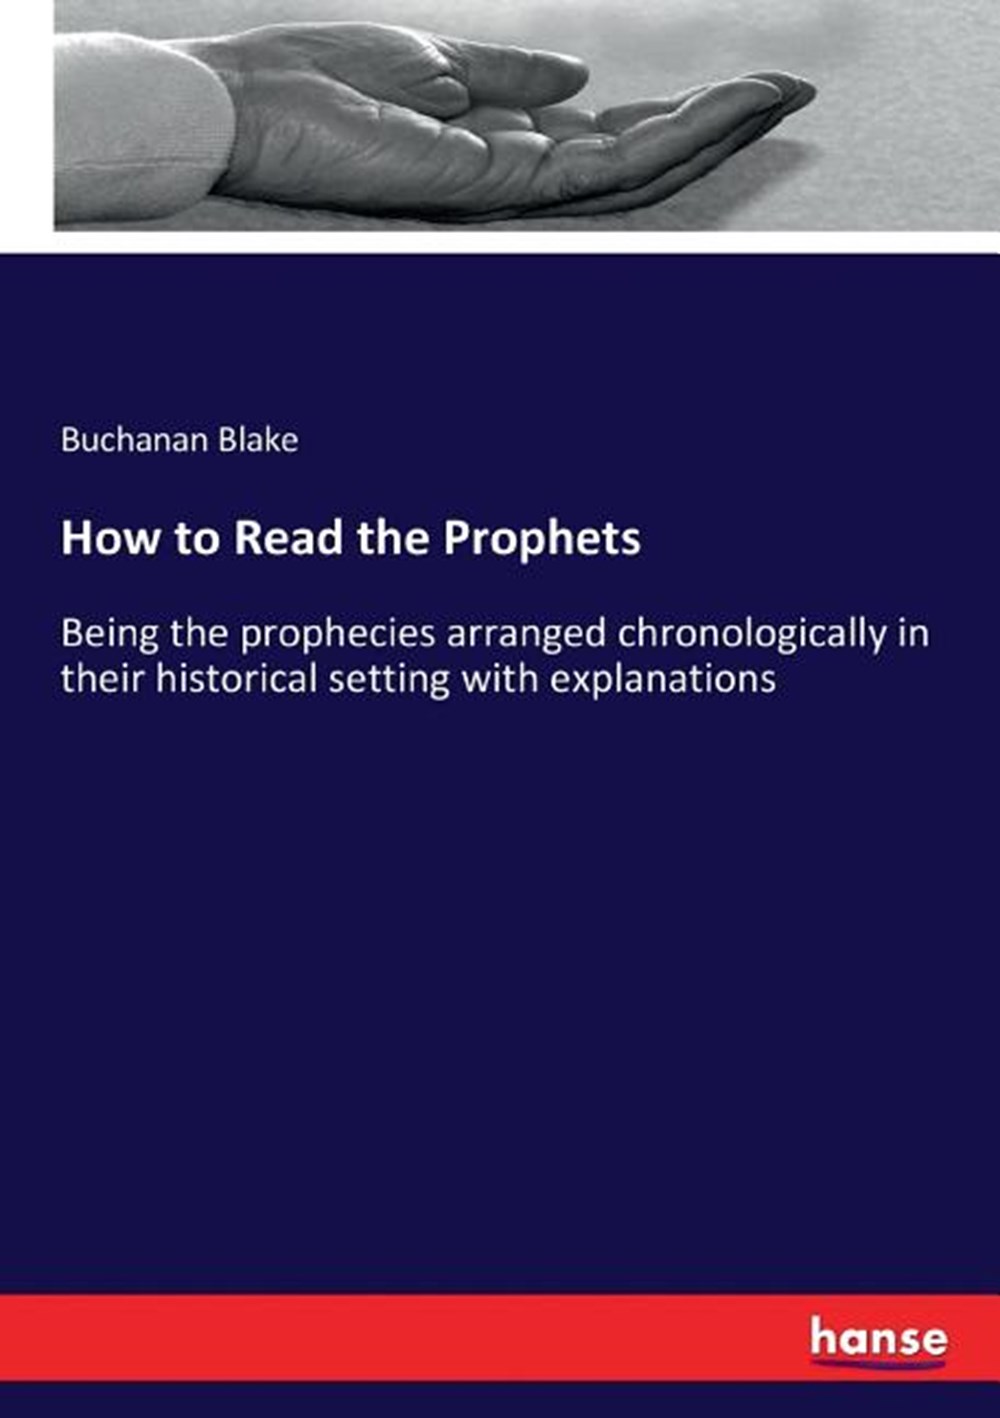 How to Read the Prophets: Being the prophecies arranged chronologically in their historical setting 